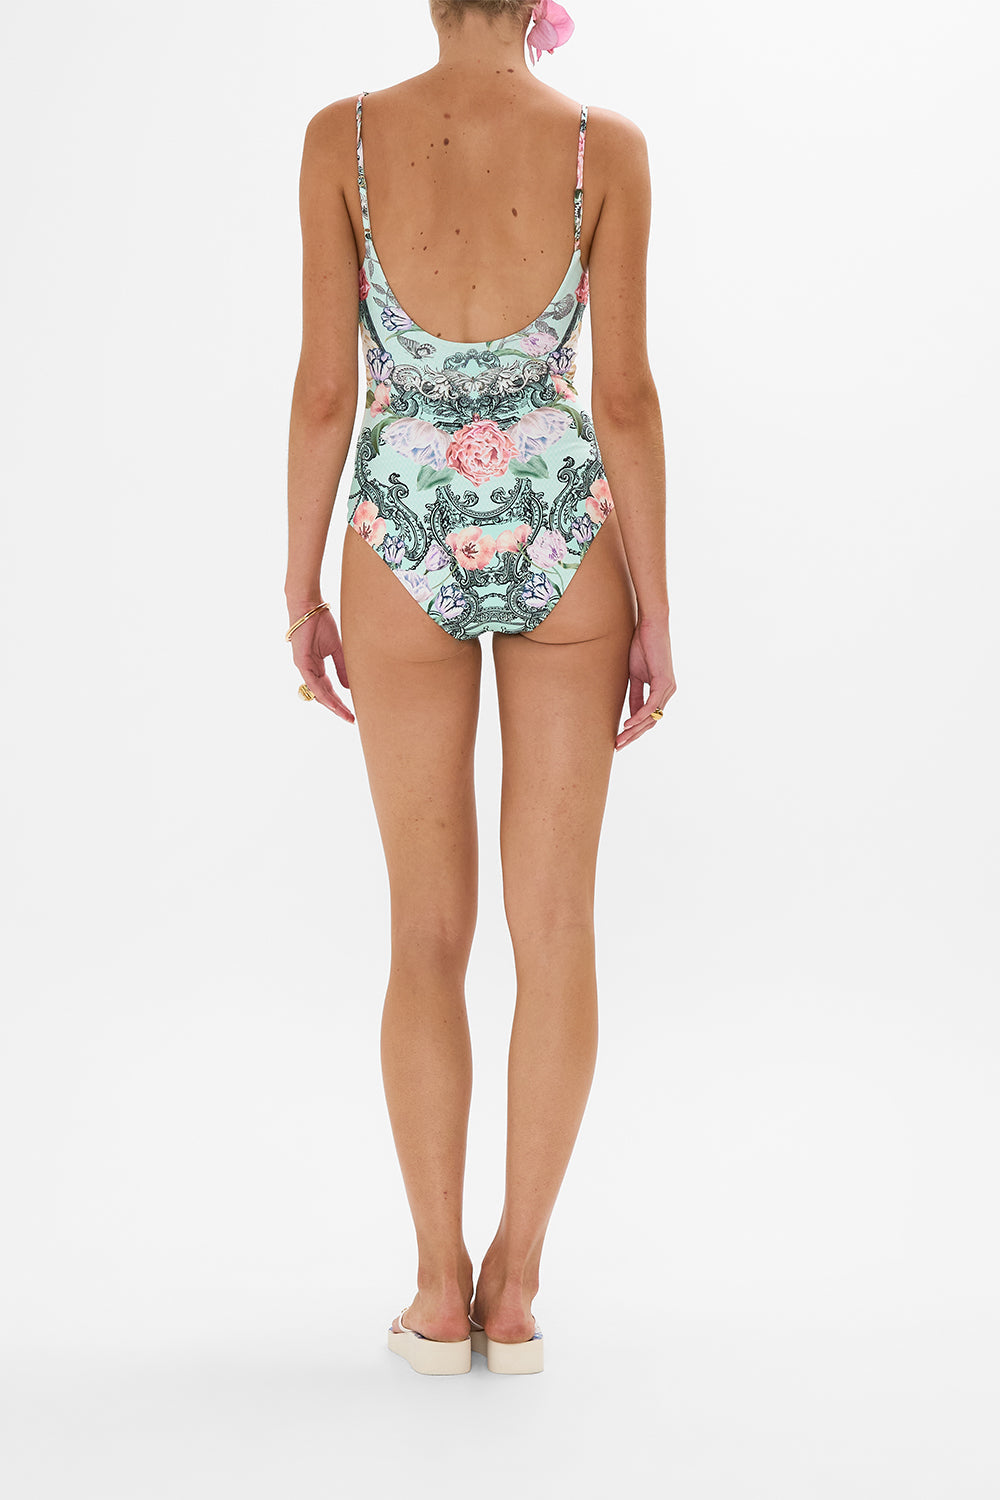 CAMILLA floral scoop neck one piece in Petal Promise Land